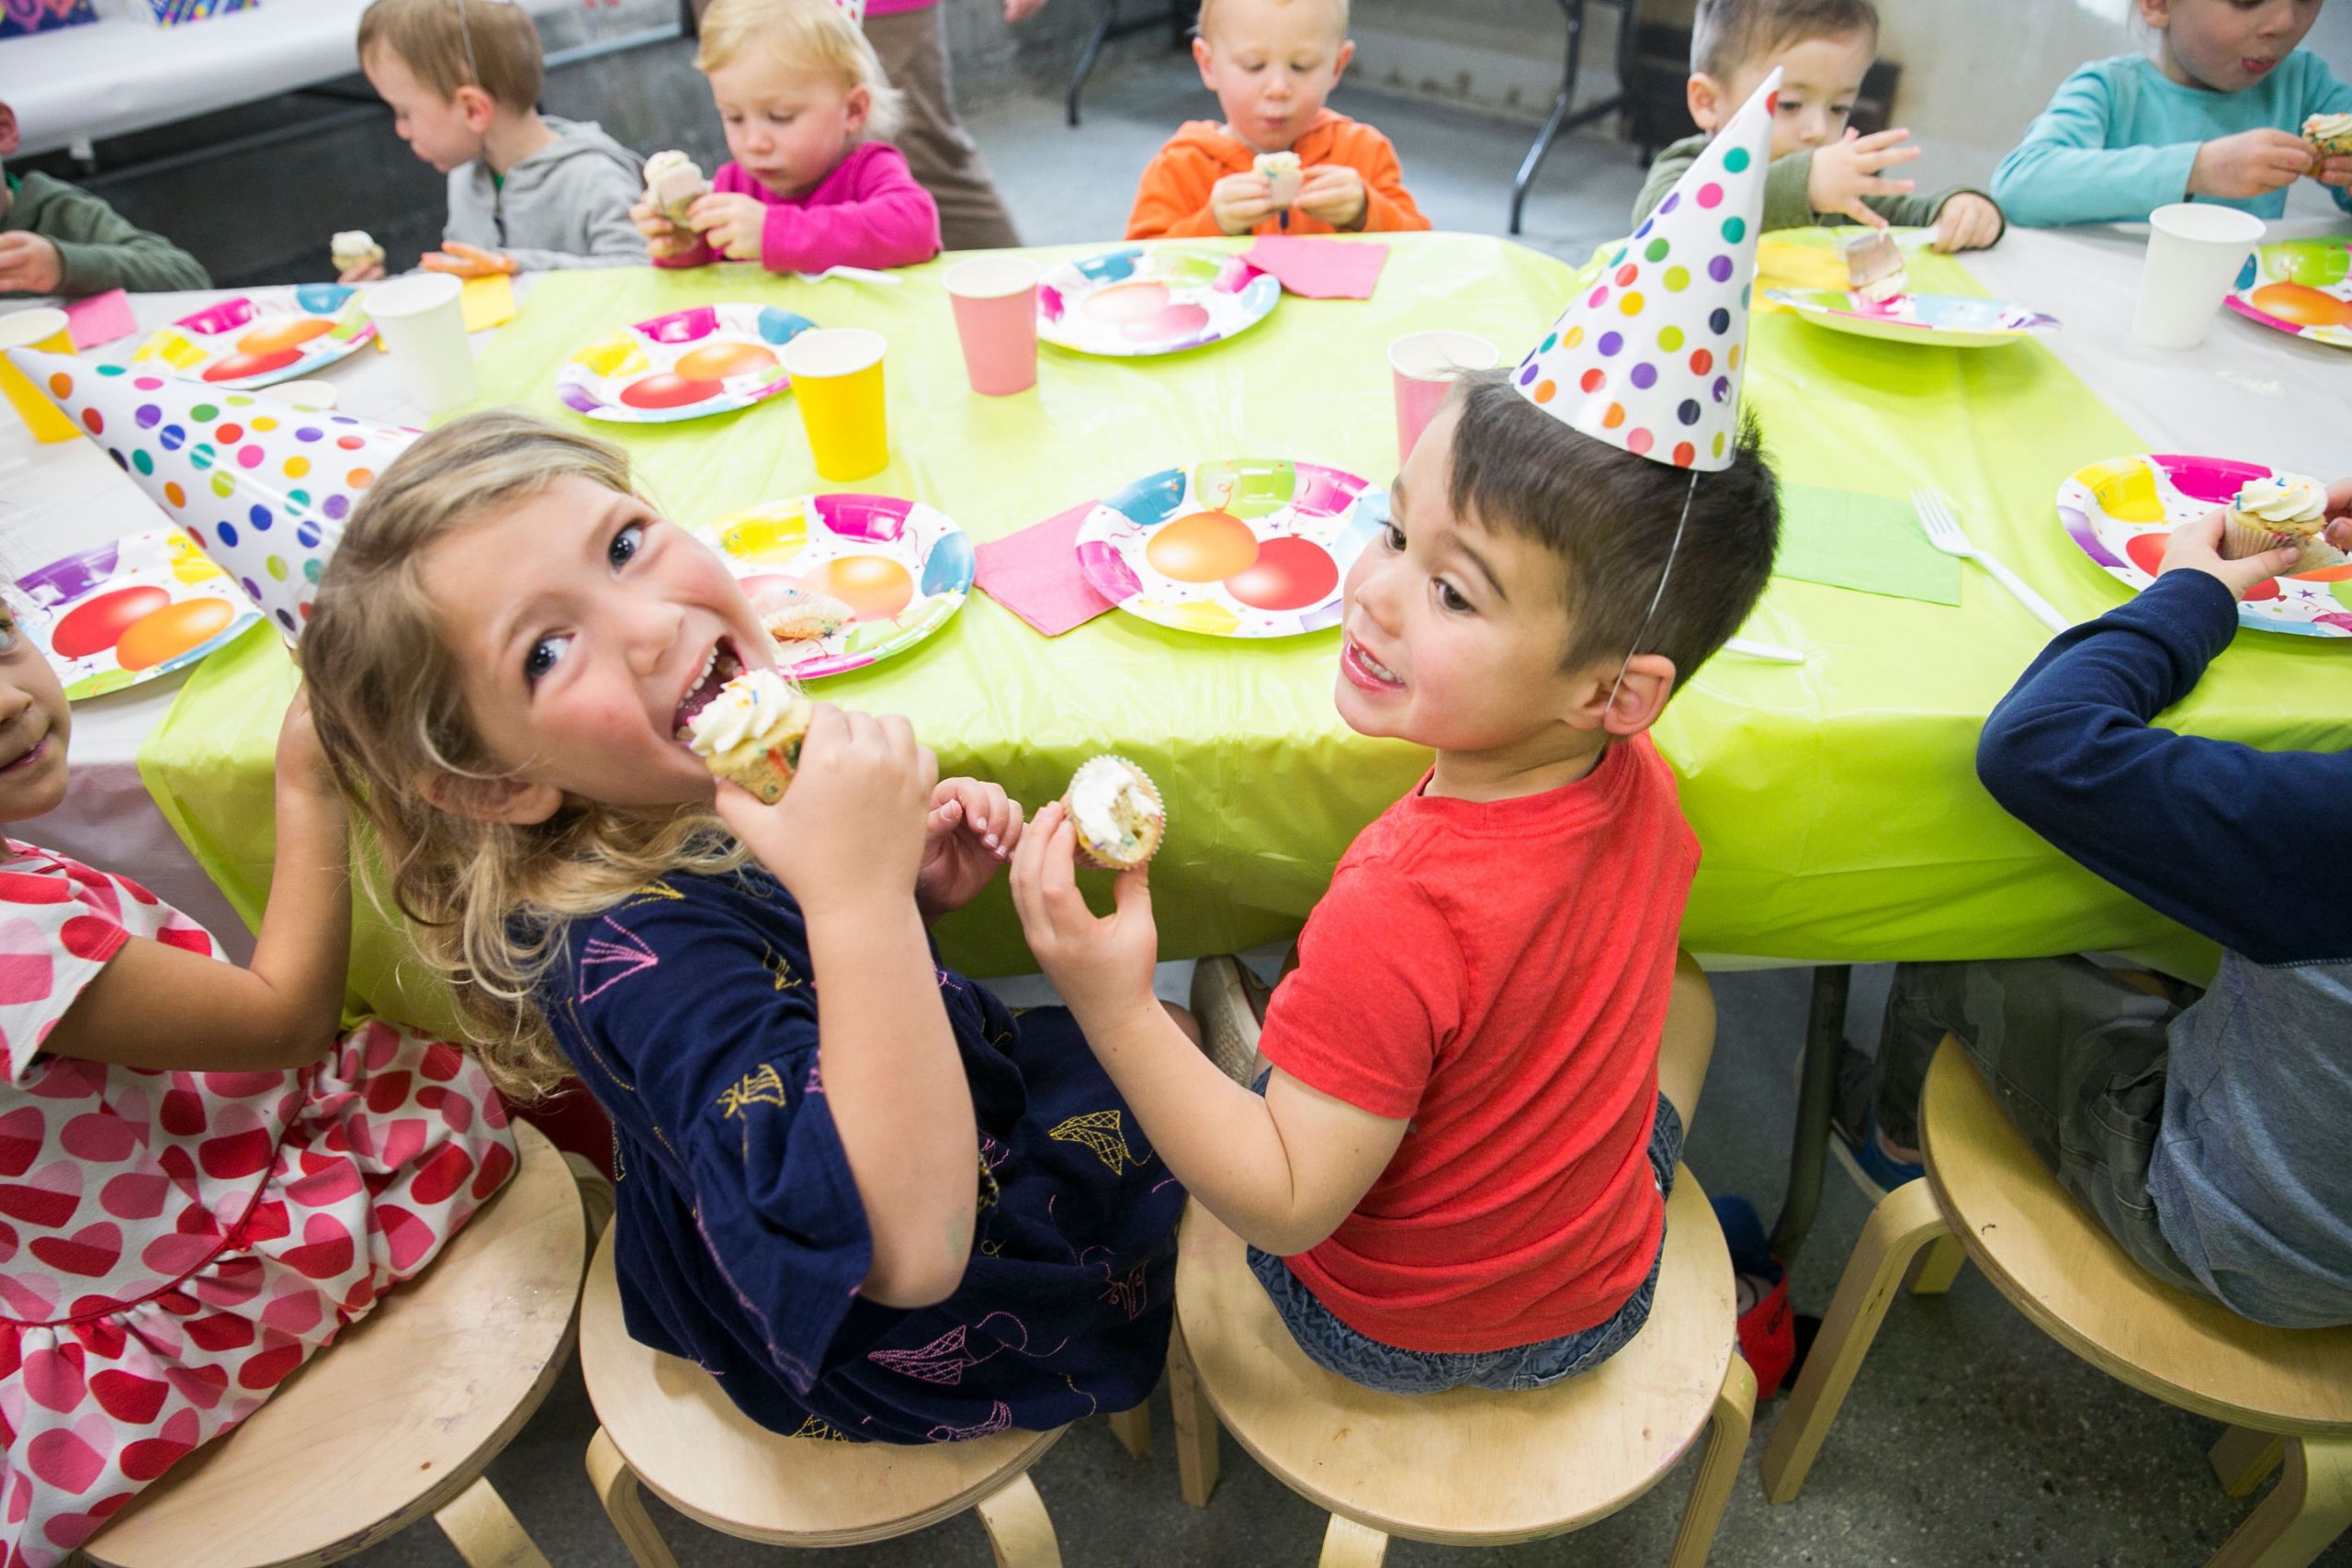 Birthday Party Locations For Kids
 12 Kid’s Birthday Party Venues That Are a Piece of Cake to